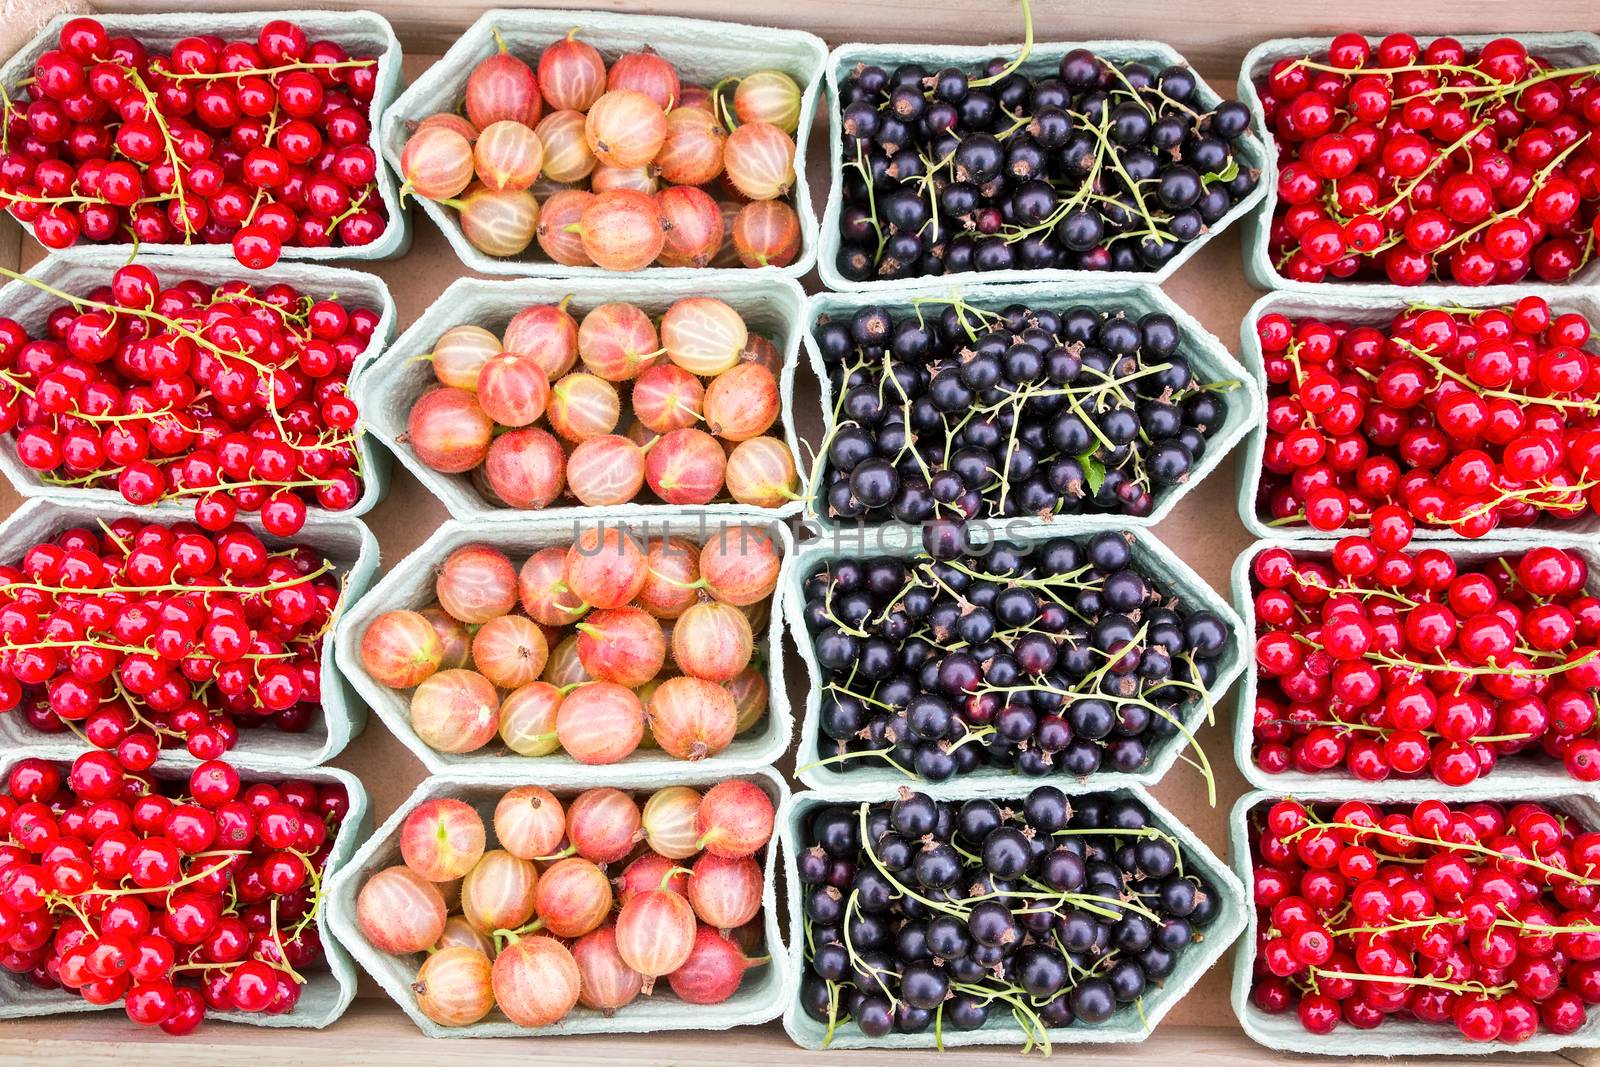 Fruit trays with blackberries currants and gooseberries on market